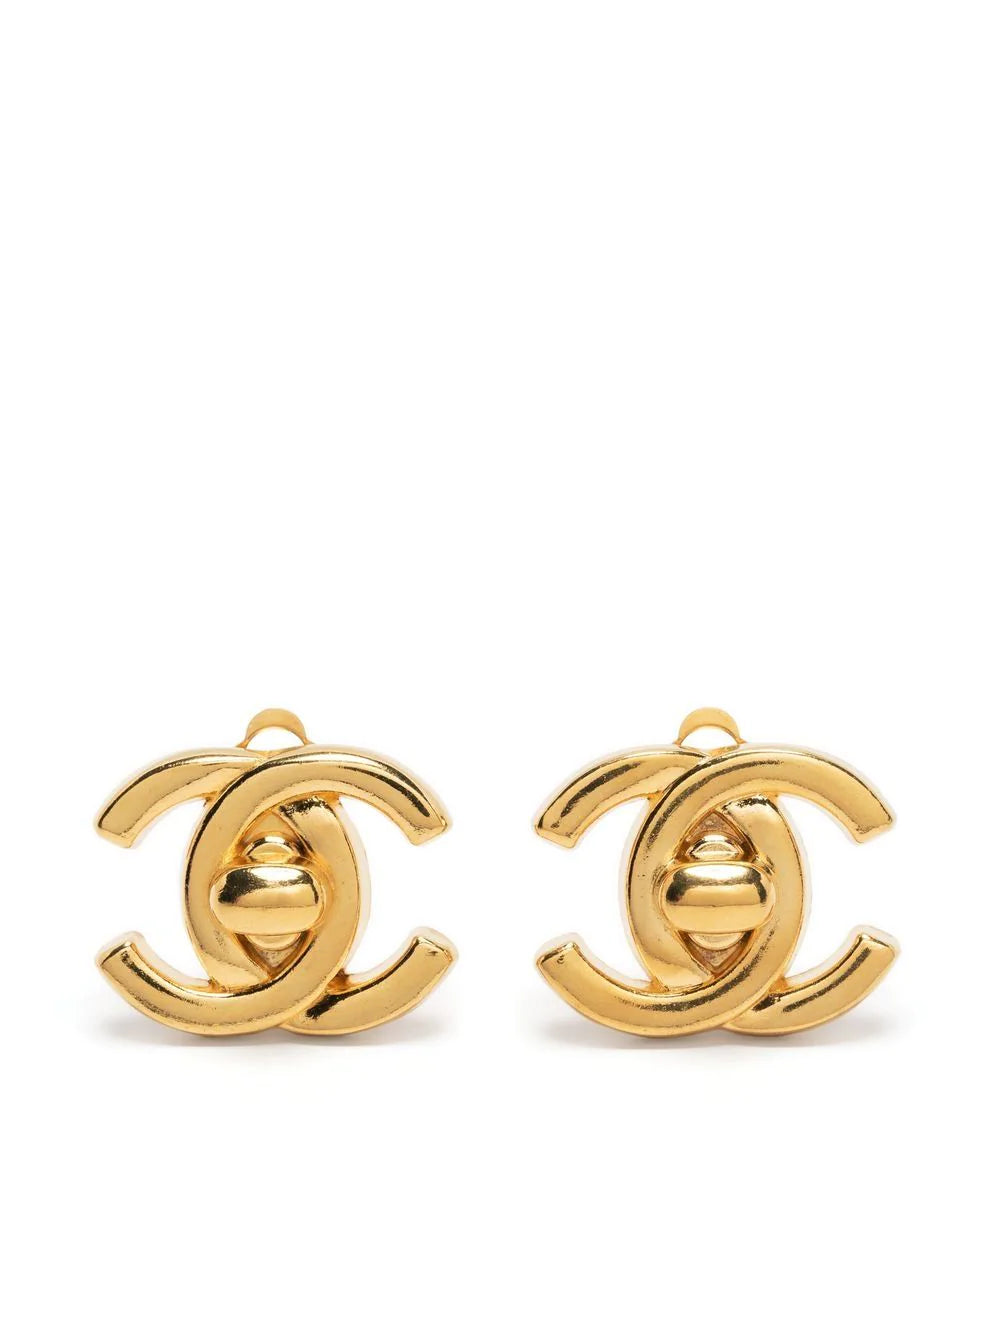 Chanel Gold Metal, Imitation Pearl, Multicolor Gripoix CC Chain Hoop  Earrings,2018 Available For Immediate Sale At Sotheby's